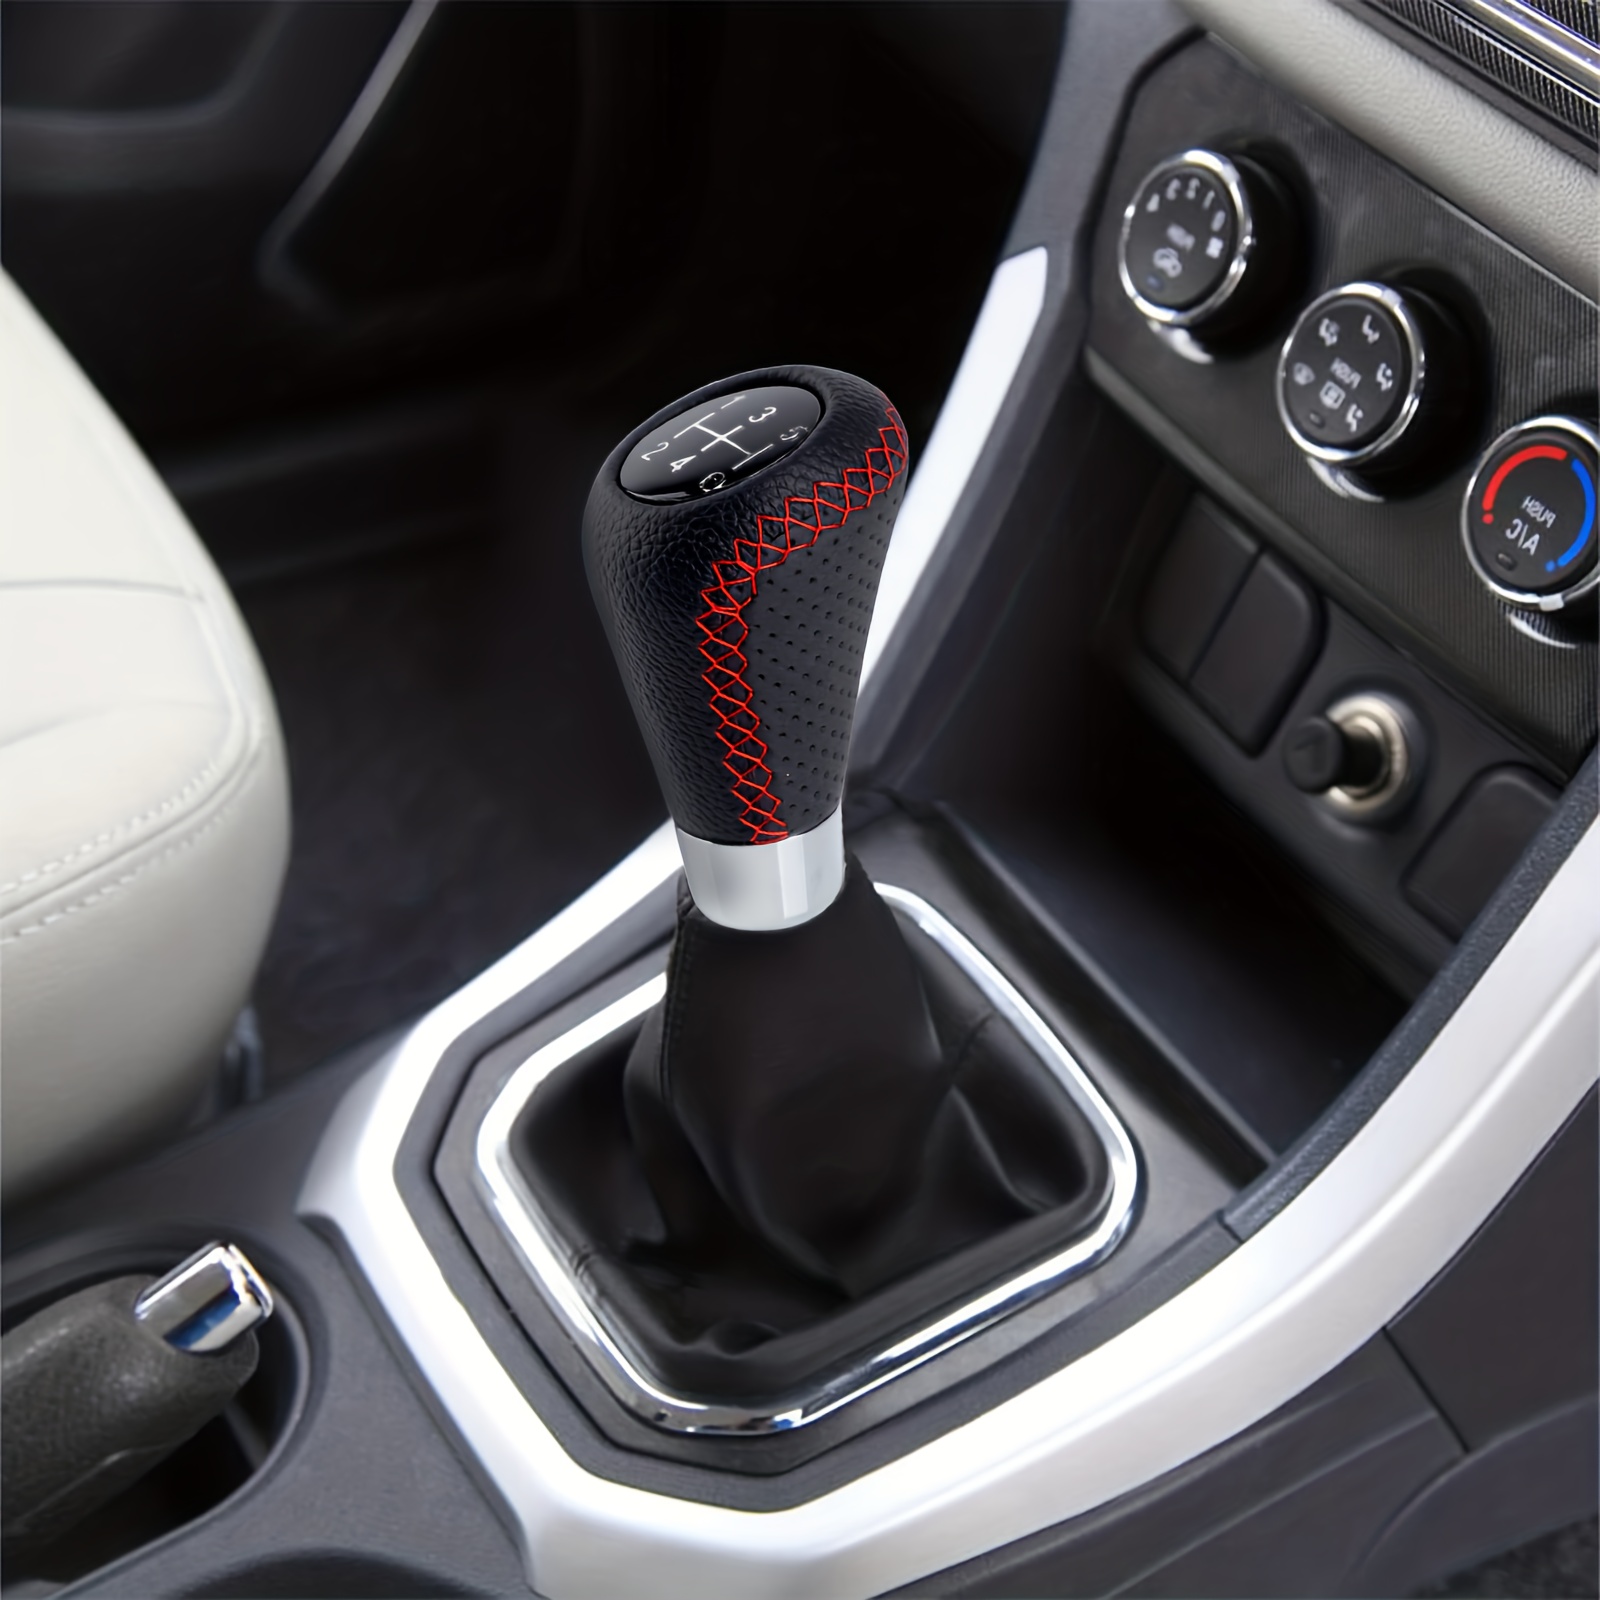 5 Speed Handle Gear Shift Knob Stick For Ax Bx Manual Transmission